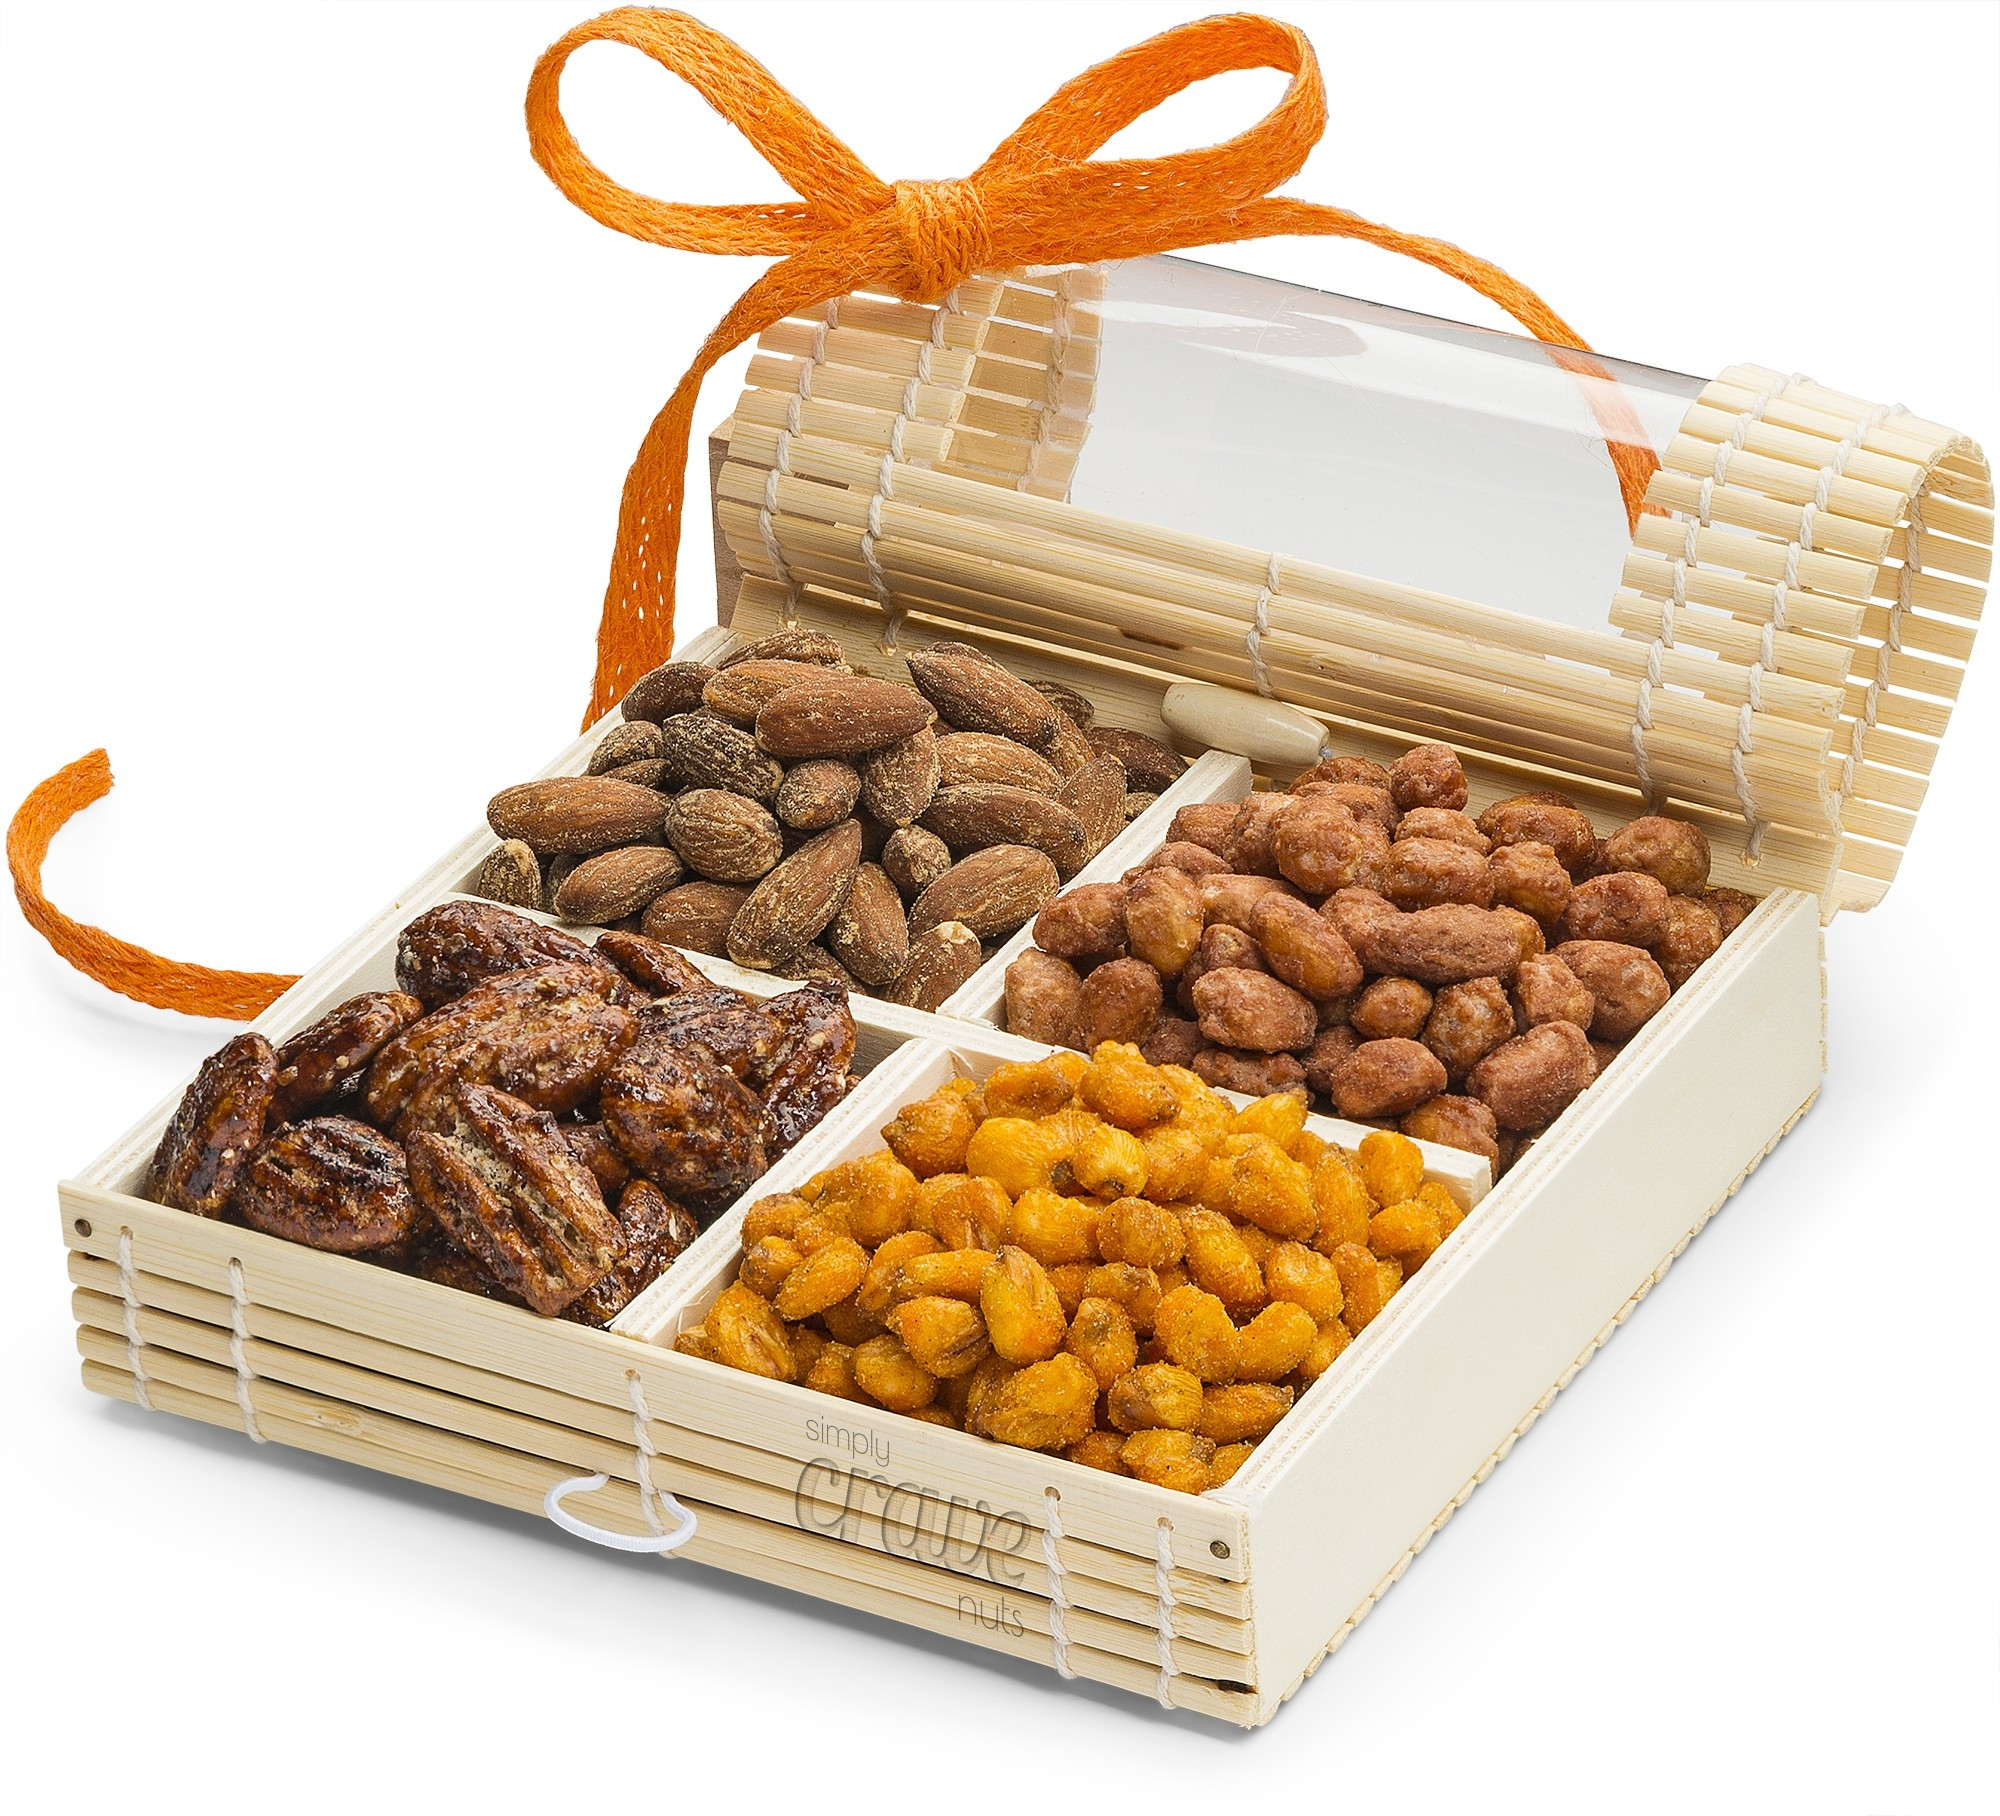 Gourmet Food Gifts
 Simply Crave Nut Gifts Gourmet Food Gift Nuts Tray Gift